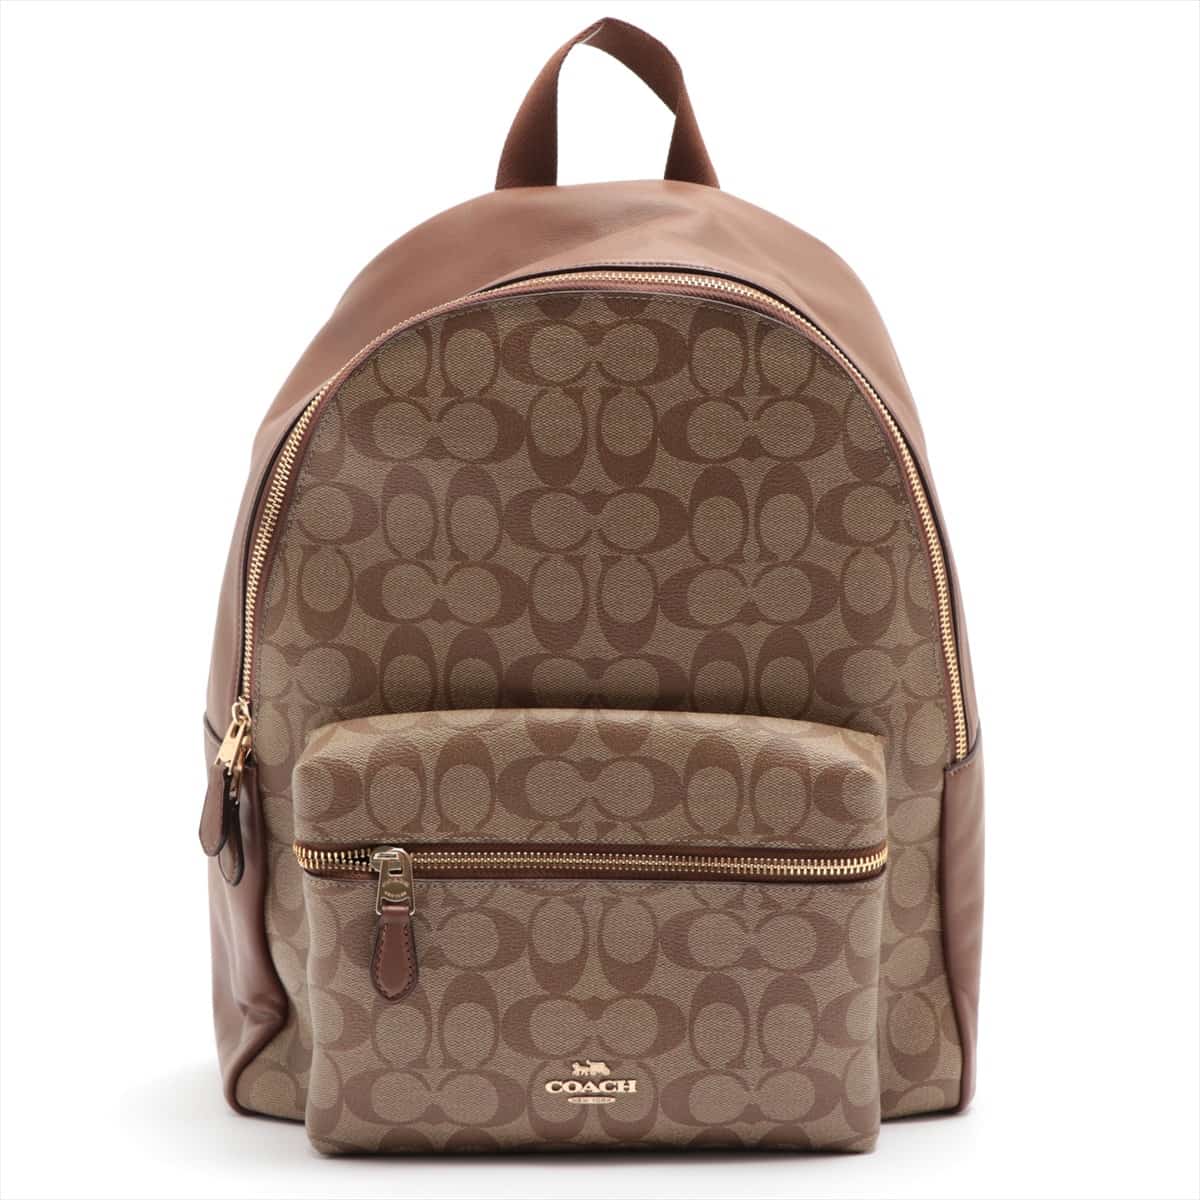 COACH Signature PVC & leather Backpack Brown F58314